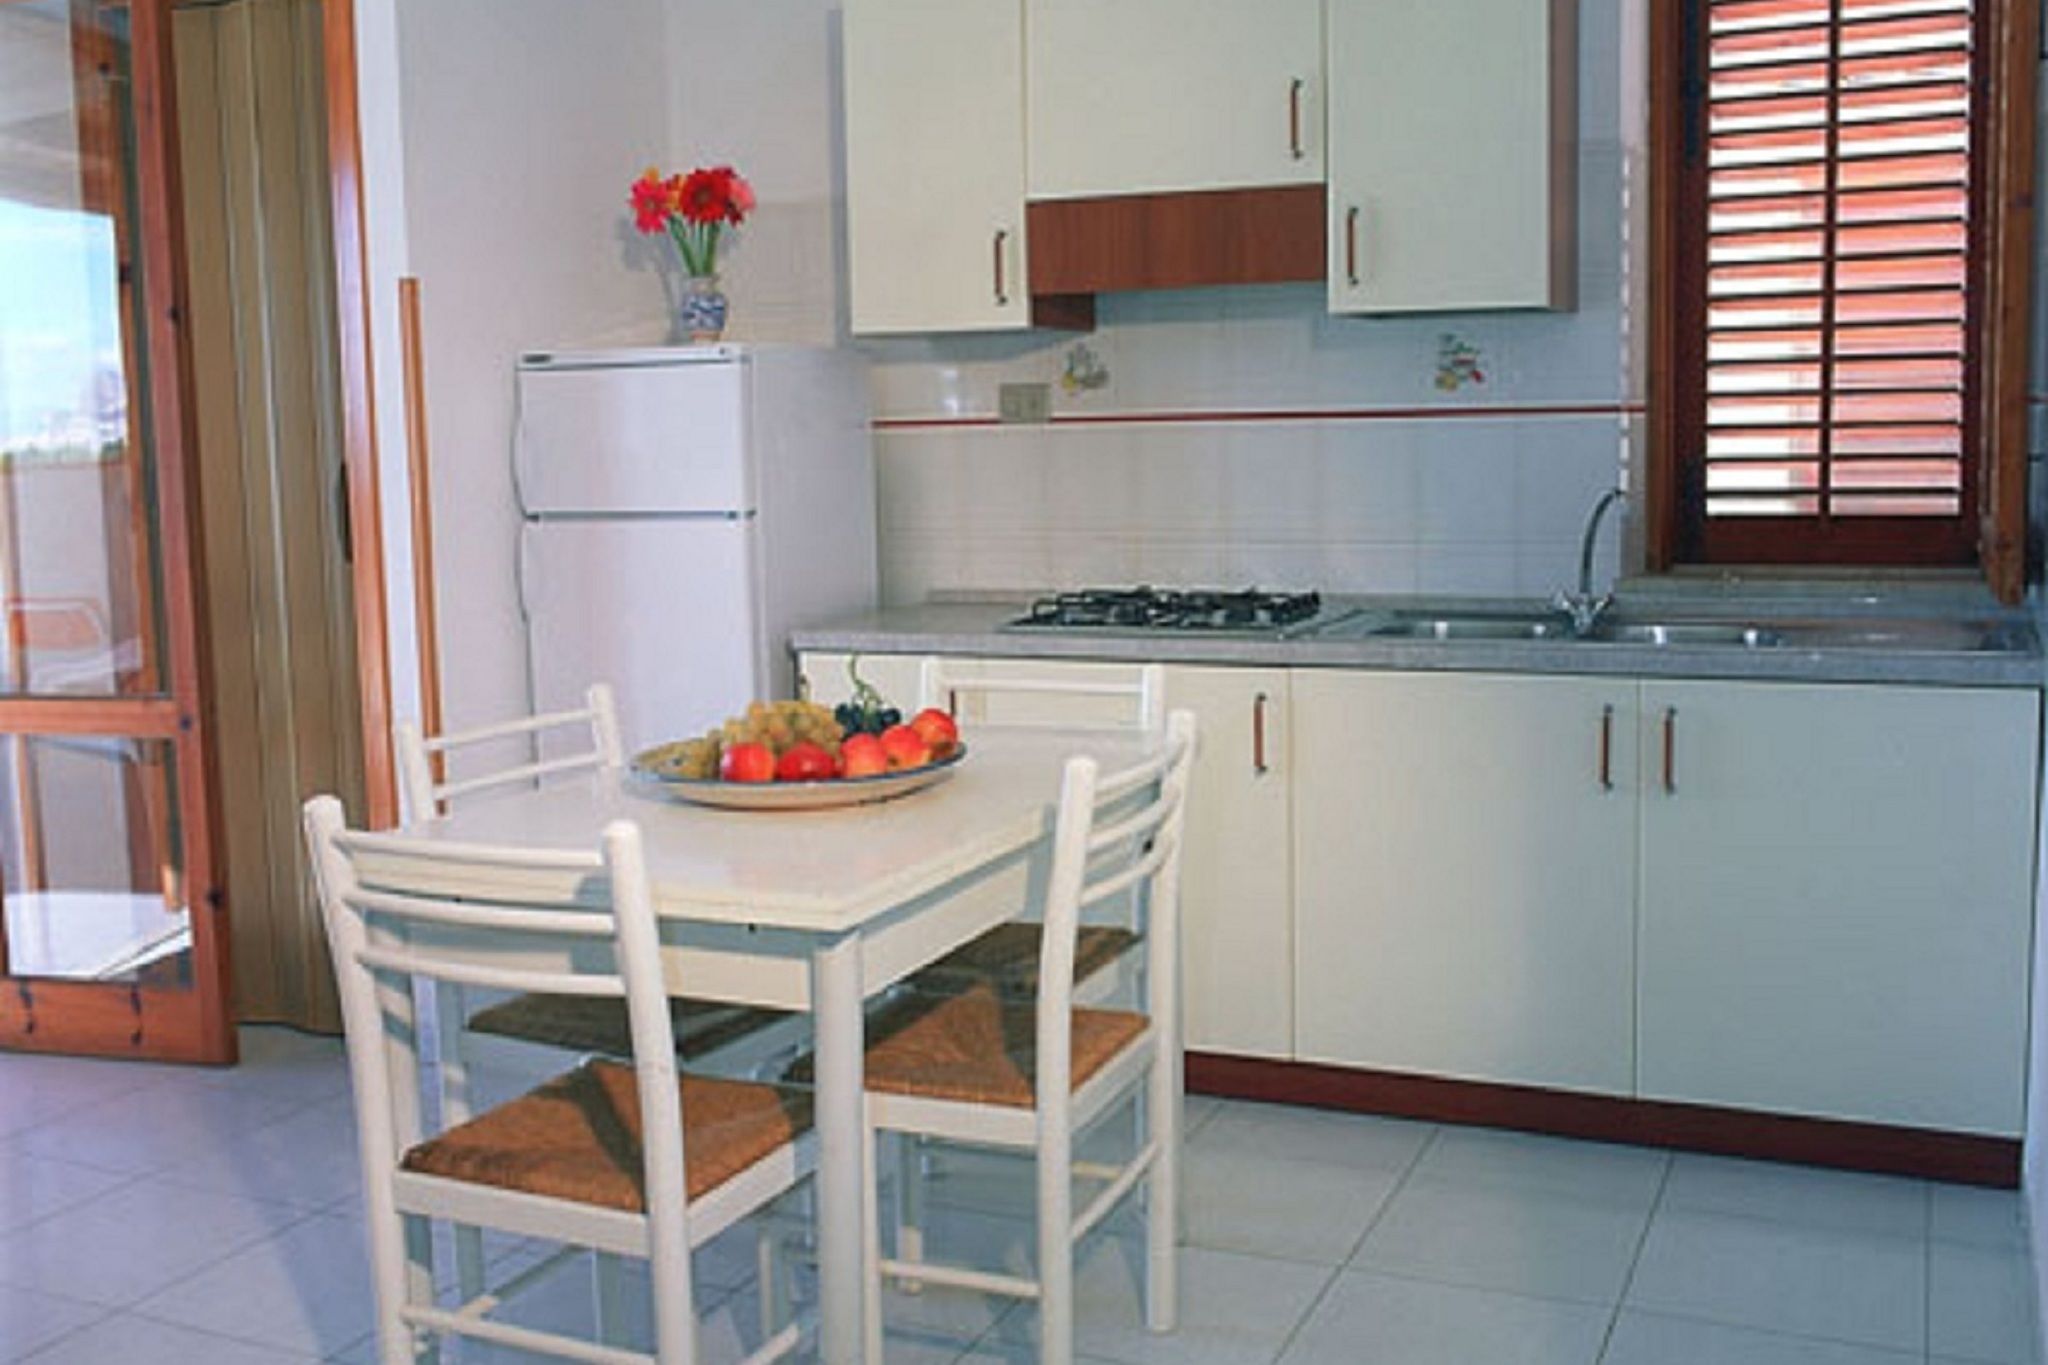 Holiday Home in Sciacca with Veranda, Terrace, BBQ, Storage